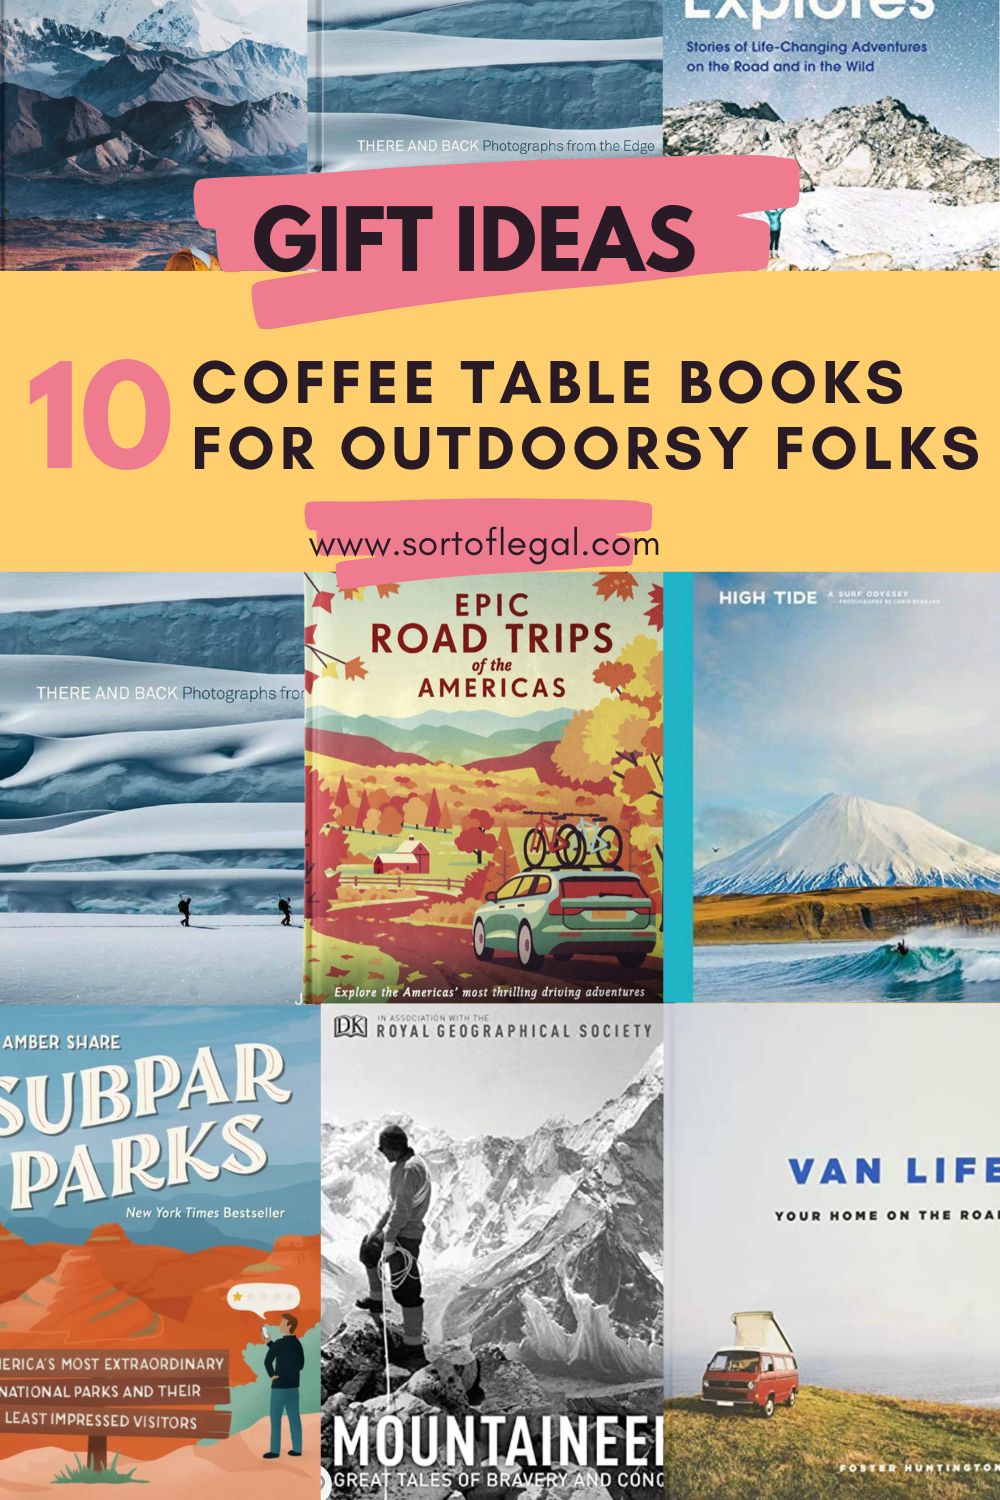 Inspiring Coffee Table Books for Trail and Ultra Runners: Our Top